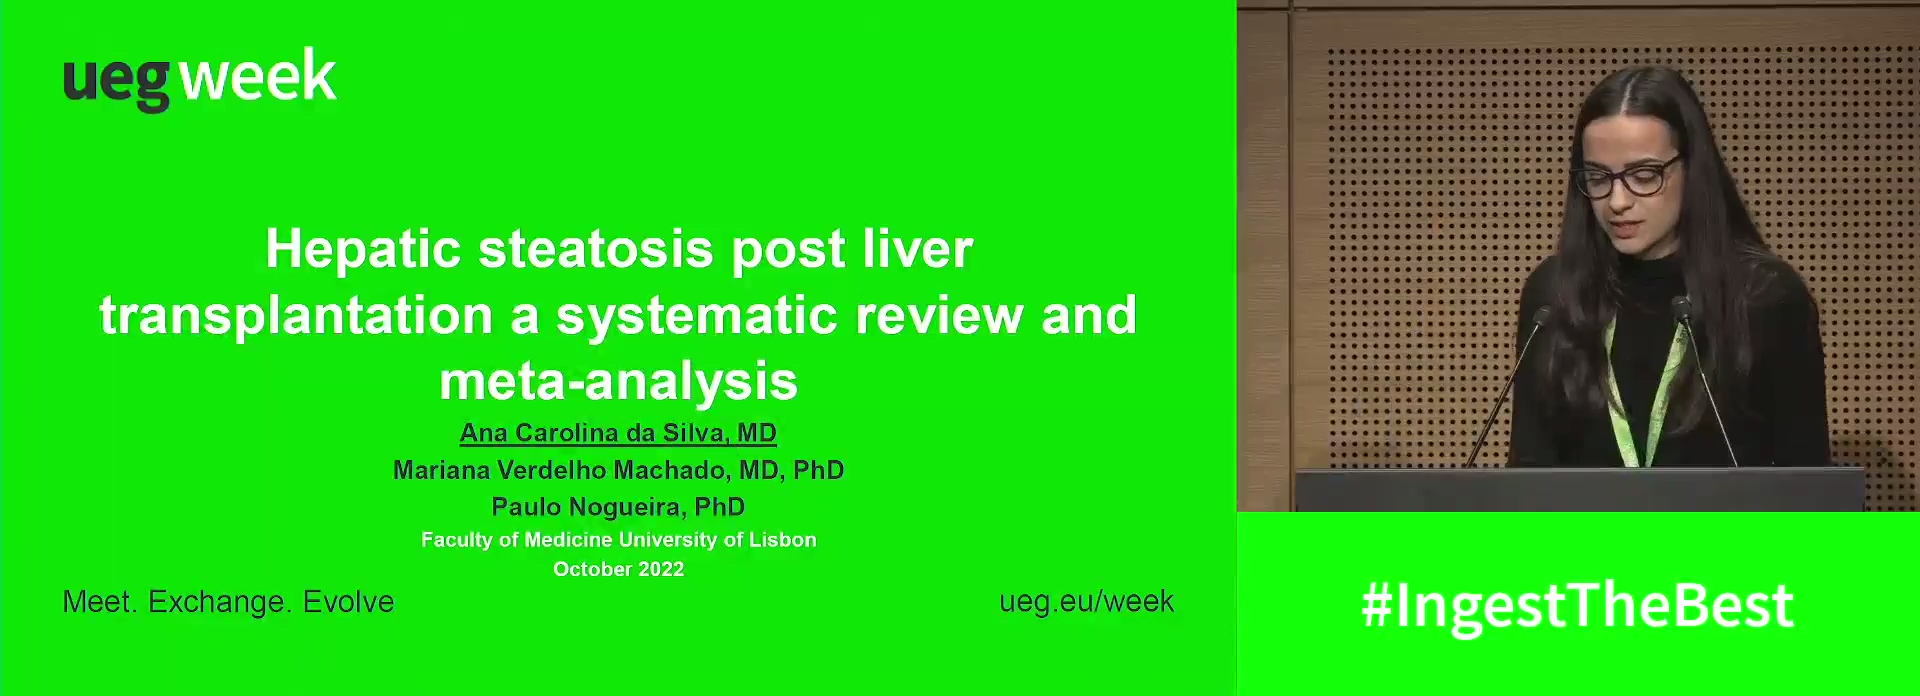 HEPATIC STEATOSIS POST LIVER TRANSPLANTATION:A SYSTEMATIC REVIEW AND META-ANALYSIS